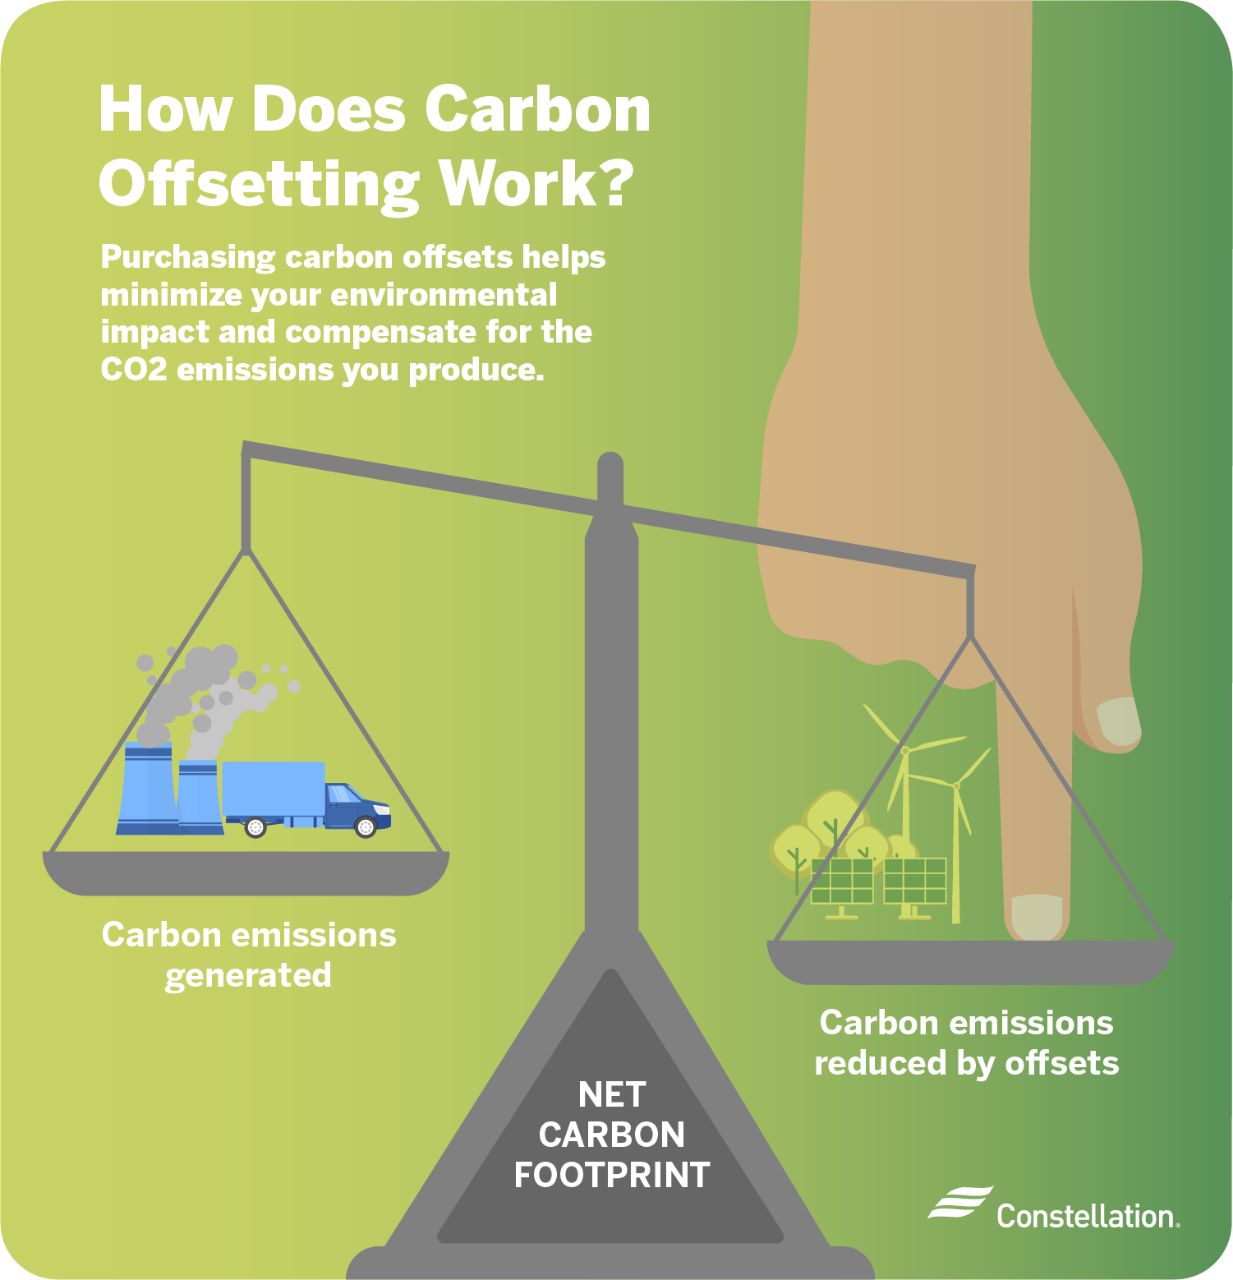 How does carbon offsetting work?